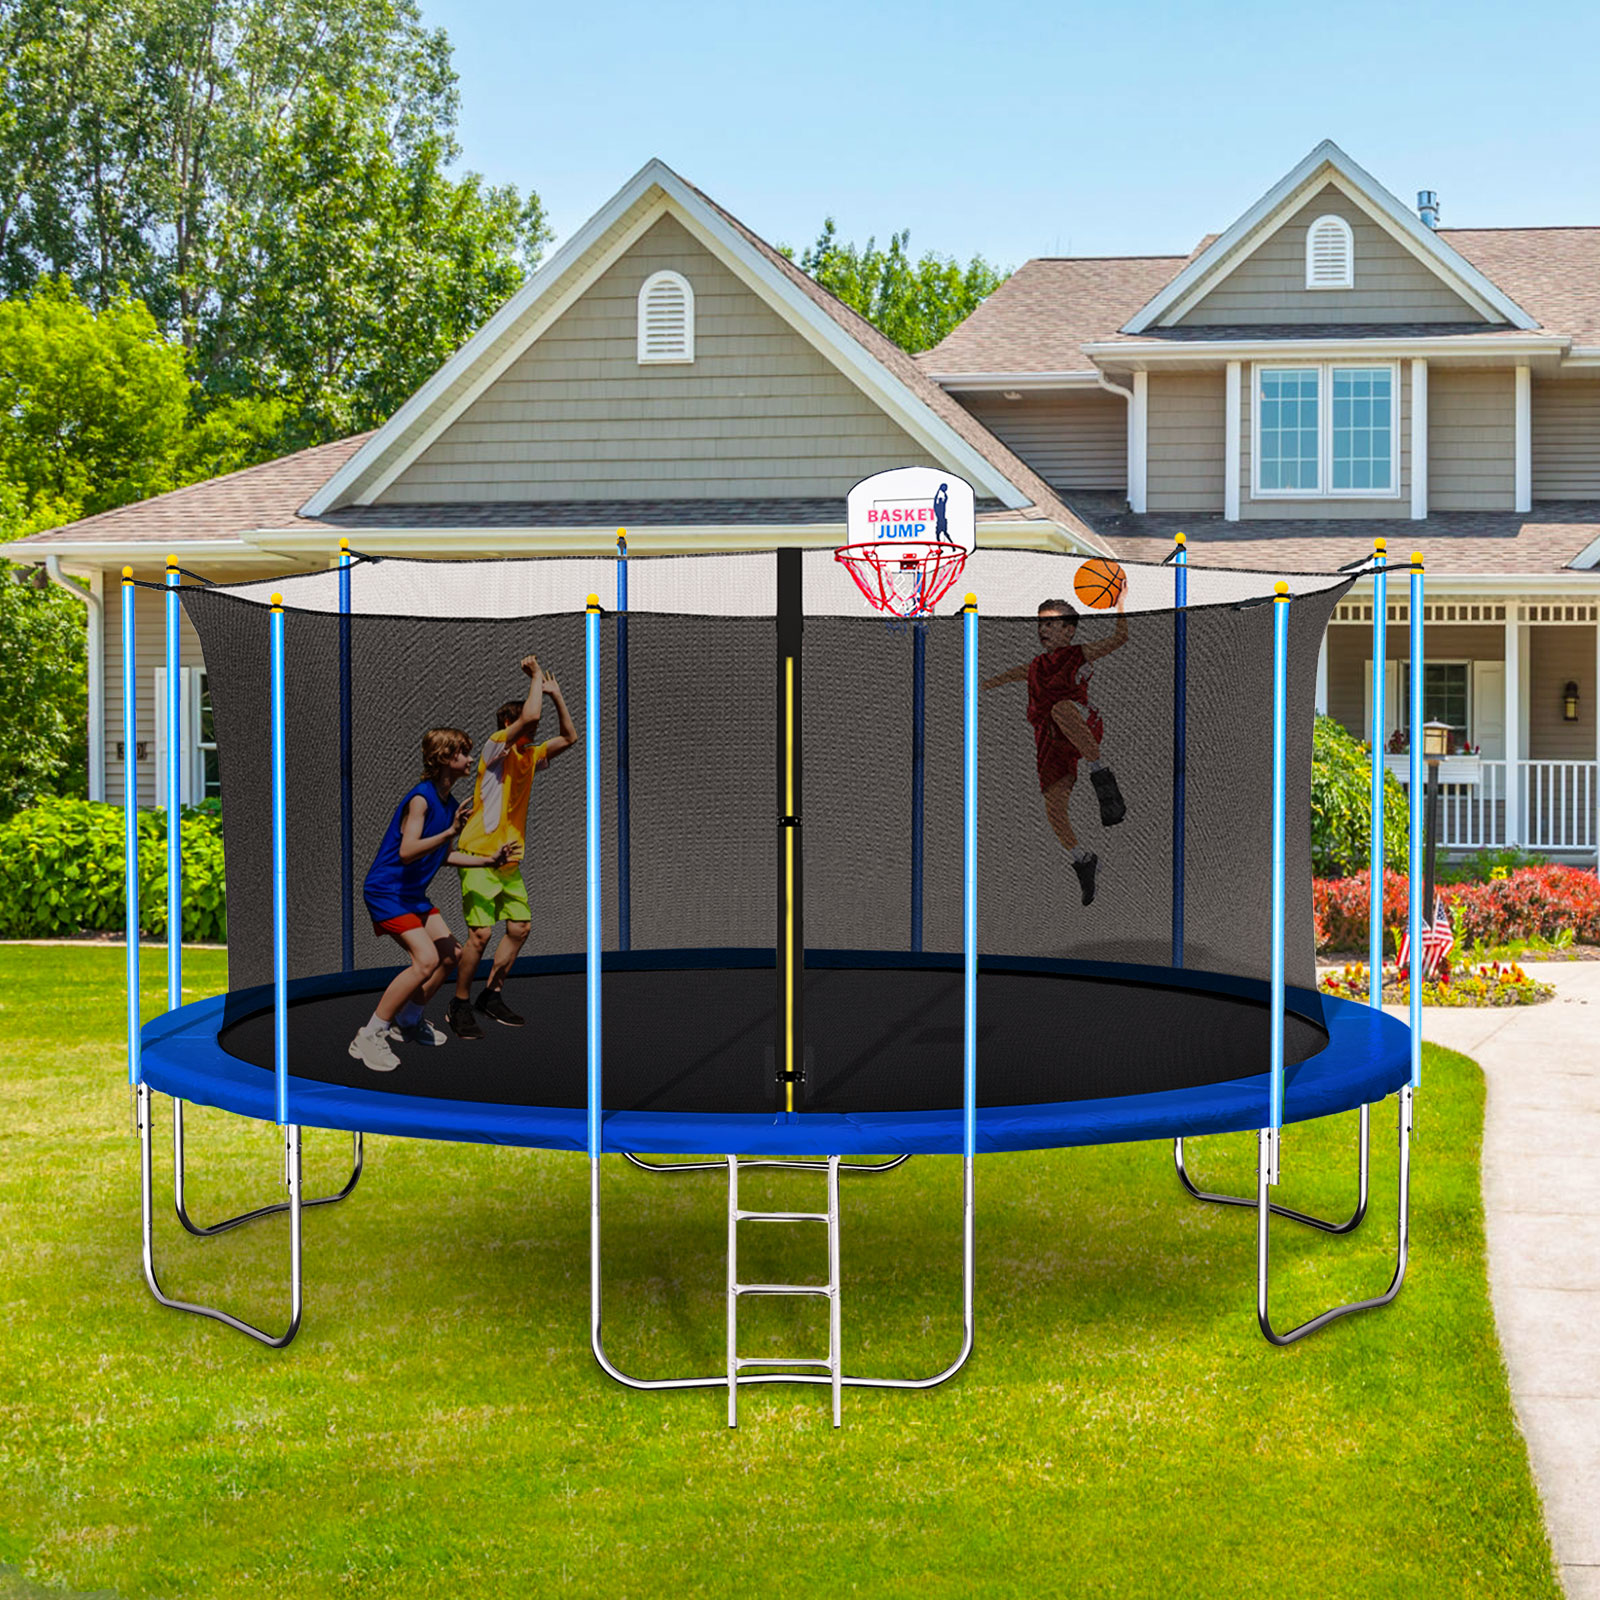 16FT Trampoline for Kids with Safety Enclosure Net, Ladder and 12 Safety Poles, Spring Cover Padding, Basketball Hoop-Boyel Living